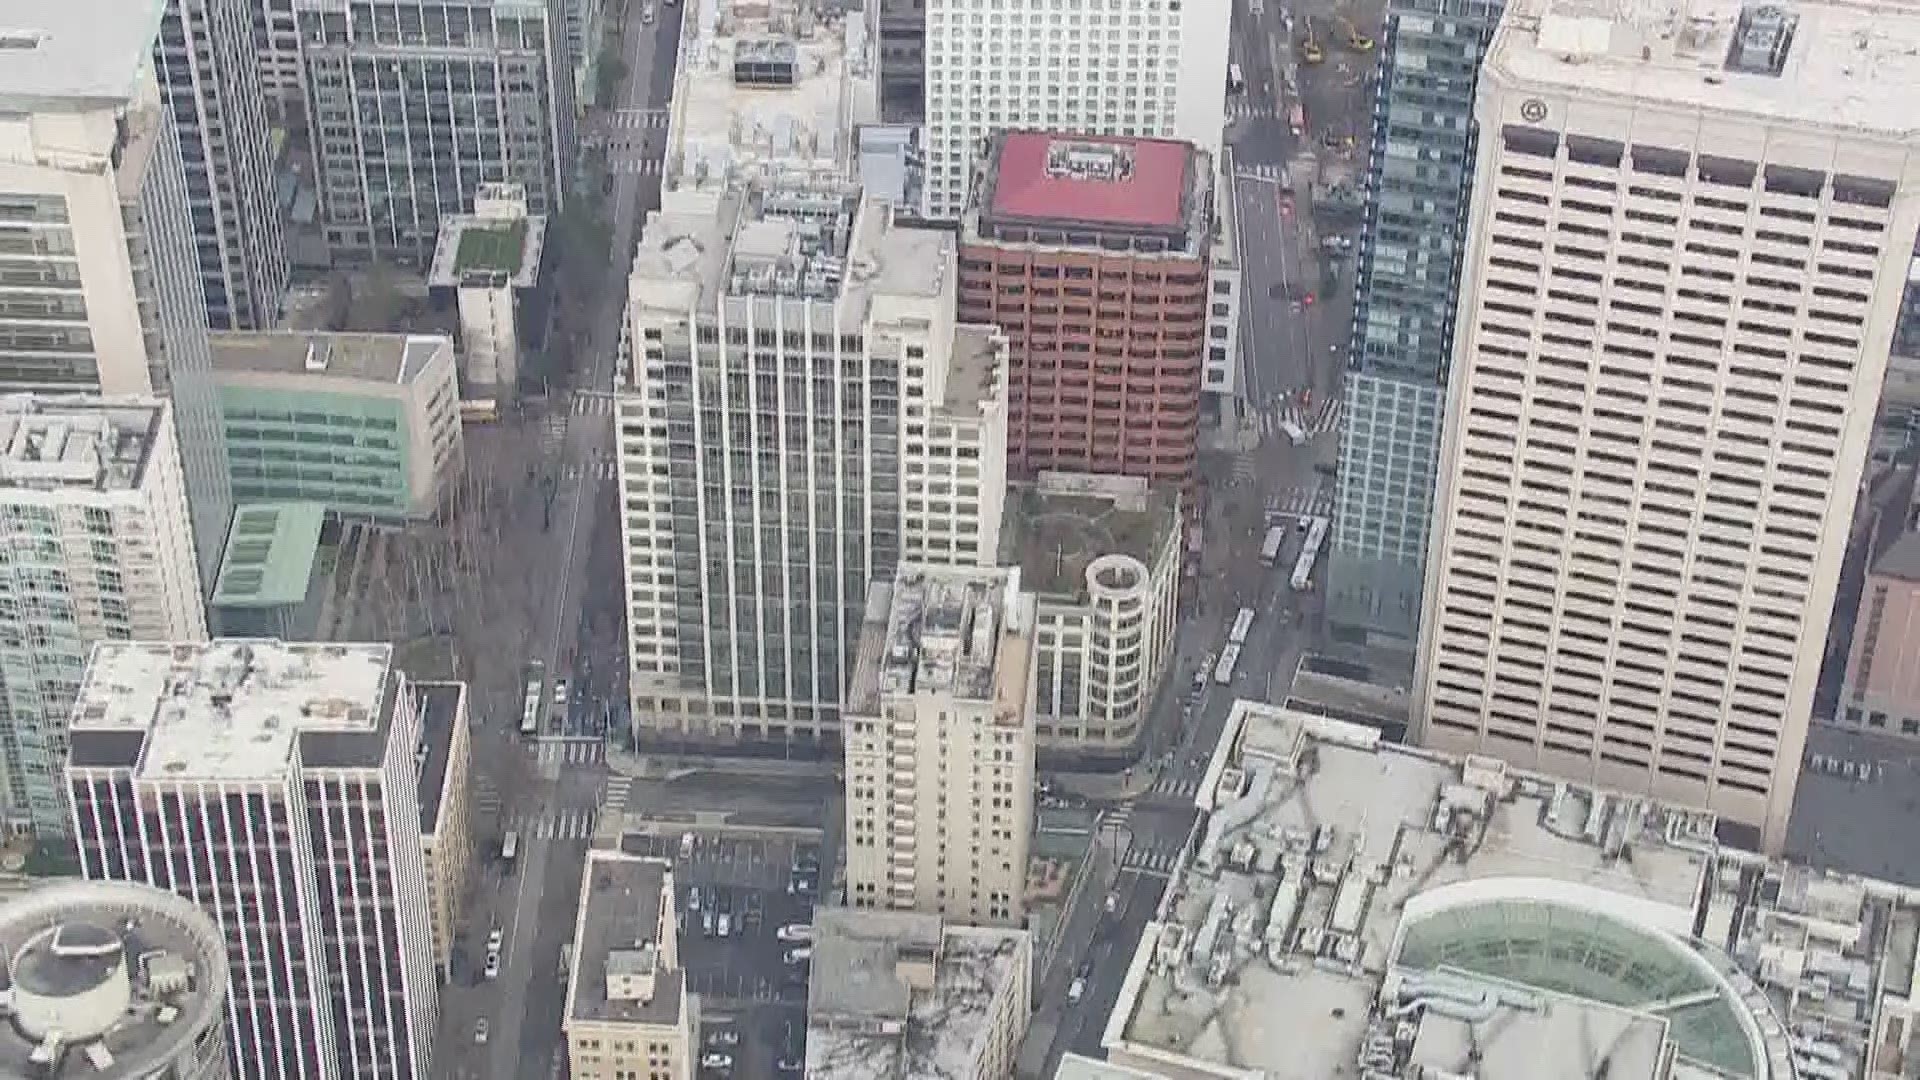 Aerials of Nordstrom's corporate offices at 1700 7th Ave. in Seattle on Feb. 3, 2021.